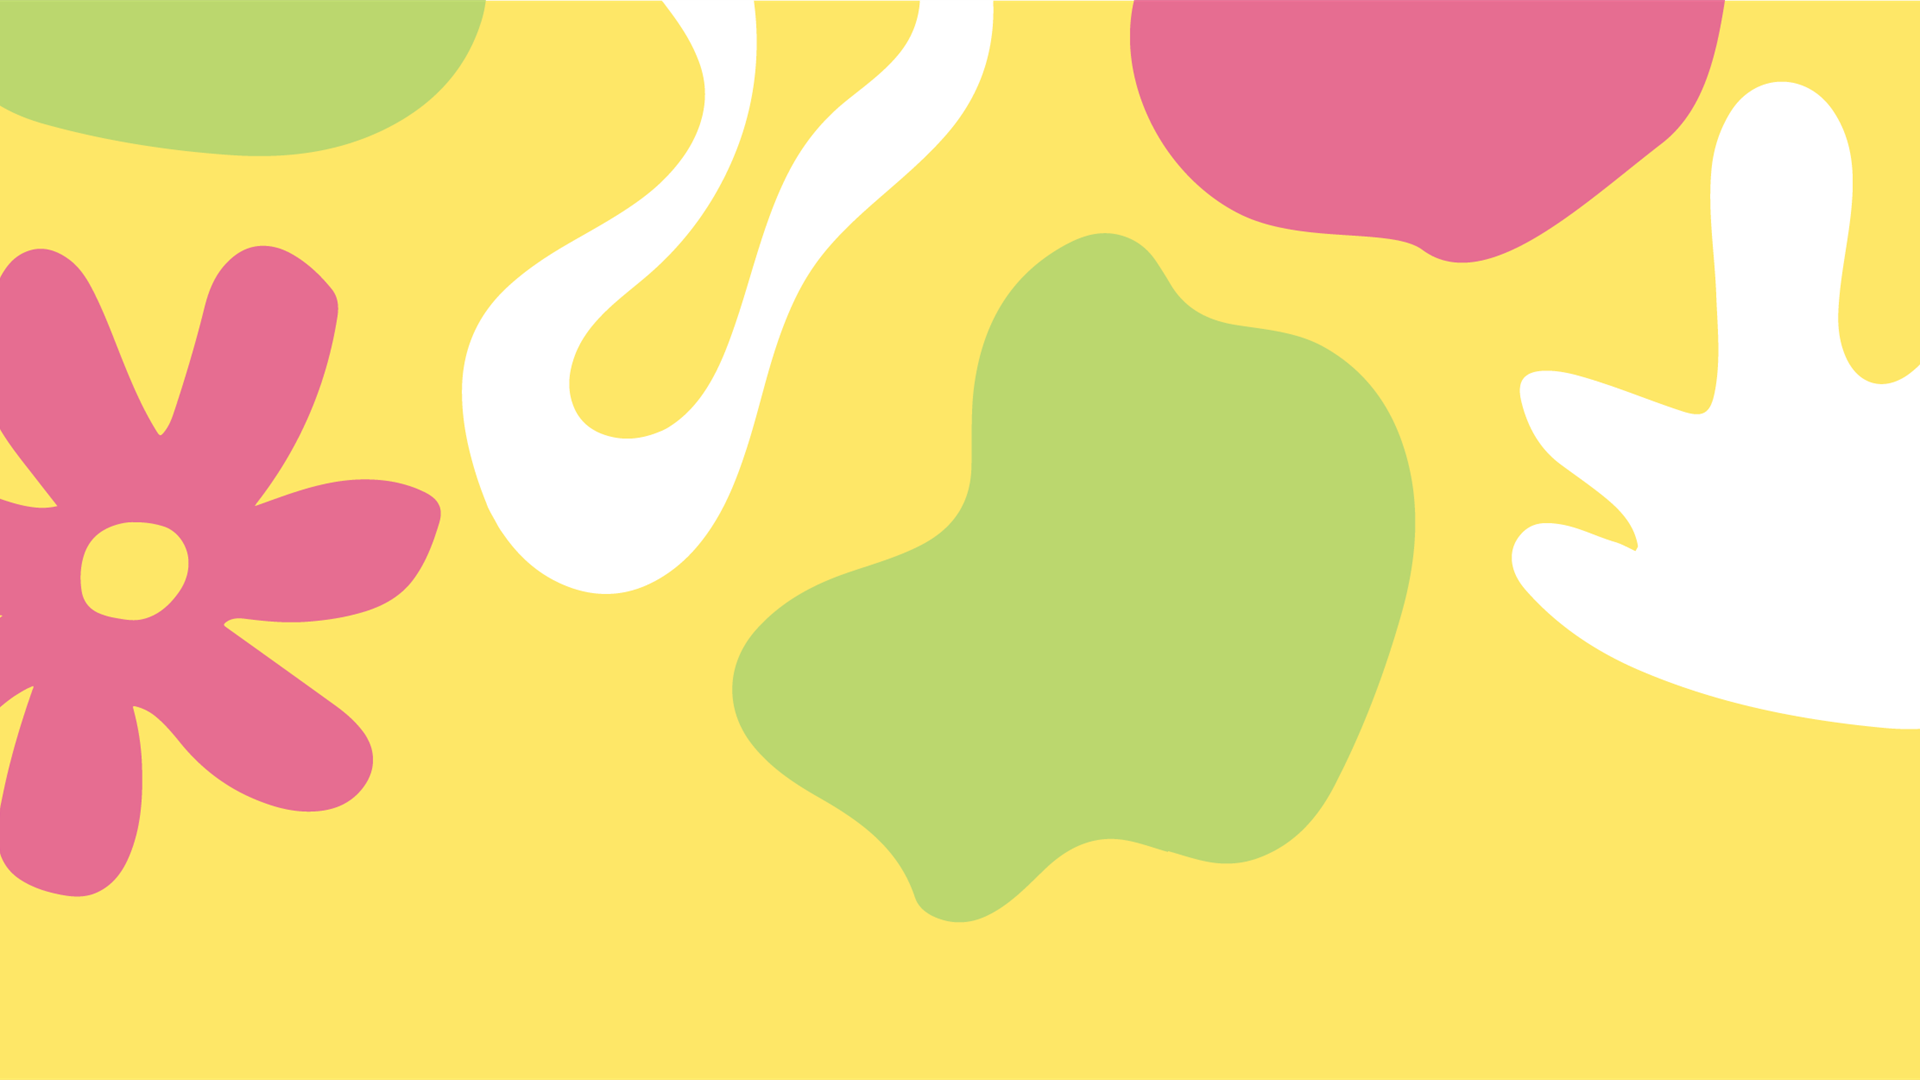 A yellow background with colourful white, pink and green shapes